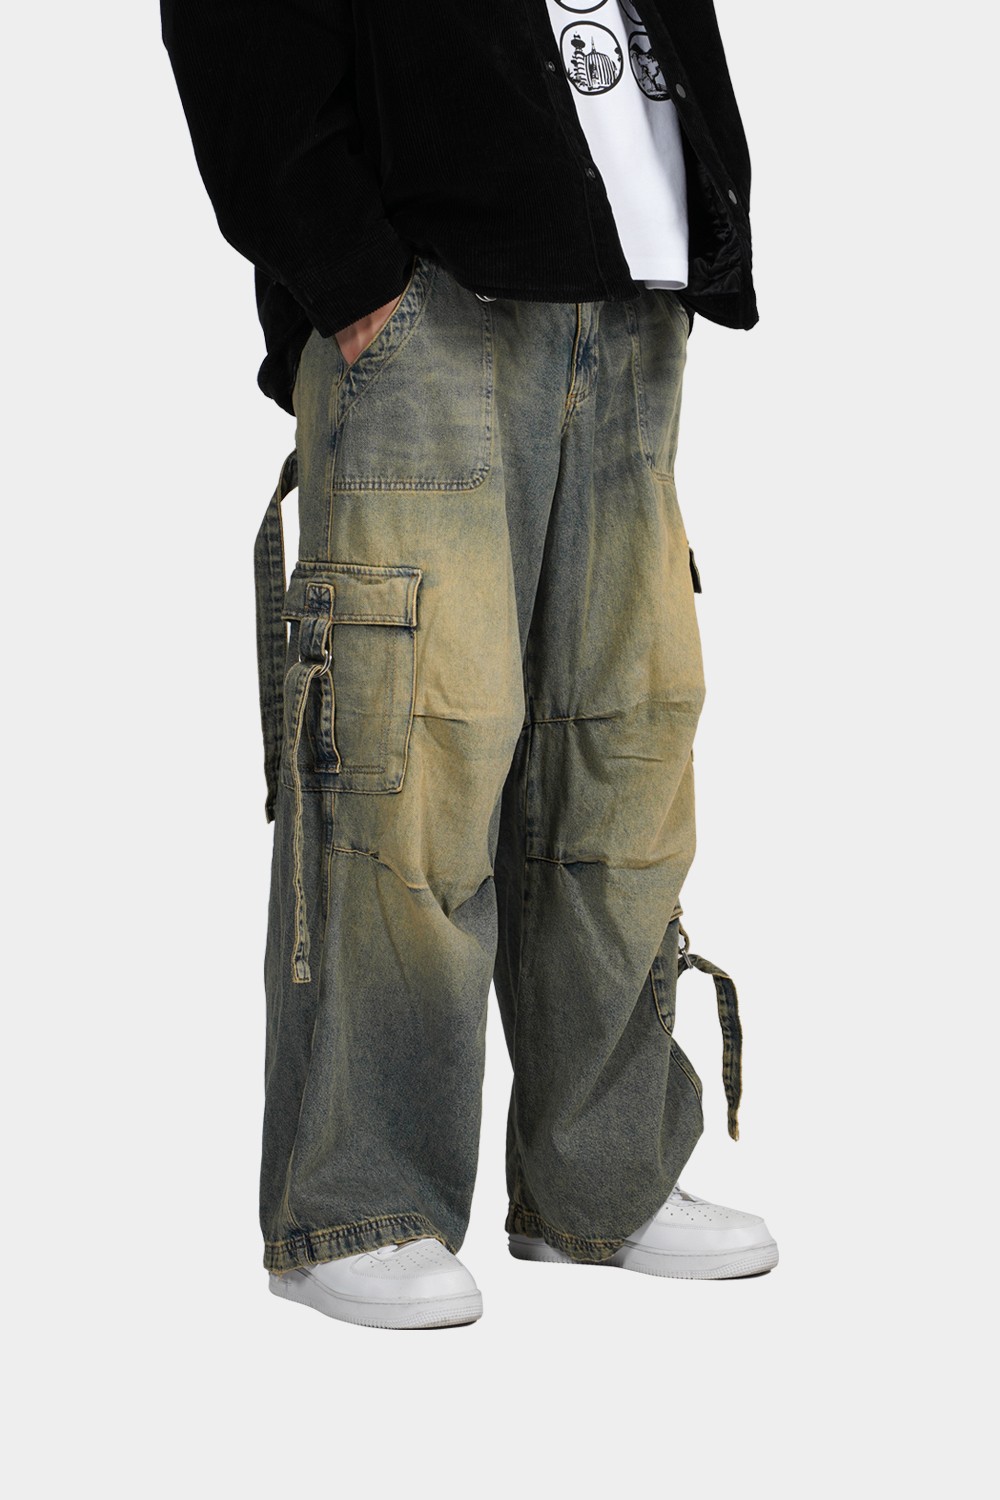 Ultra Baggy Washed Cargo Jeans (URBN-B-231)